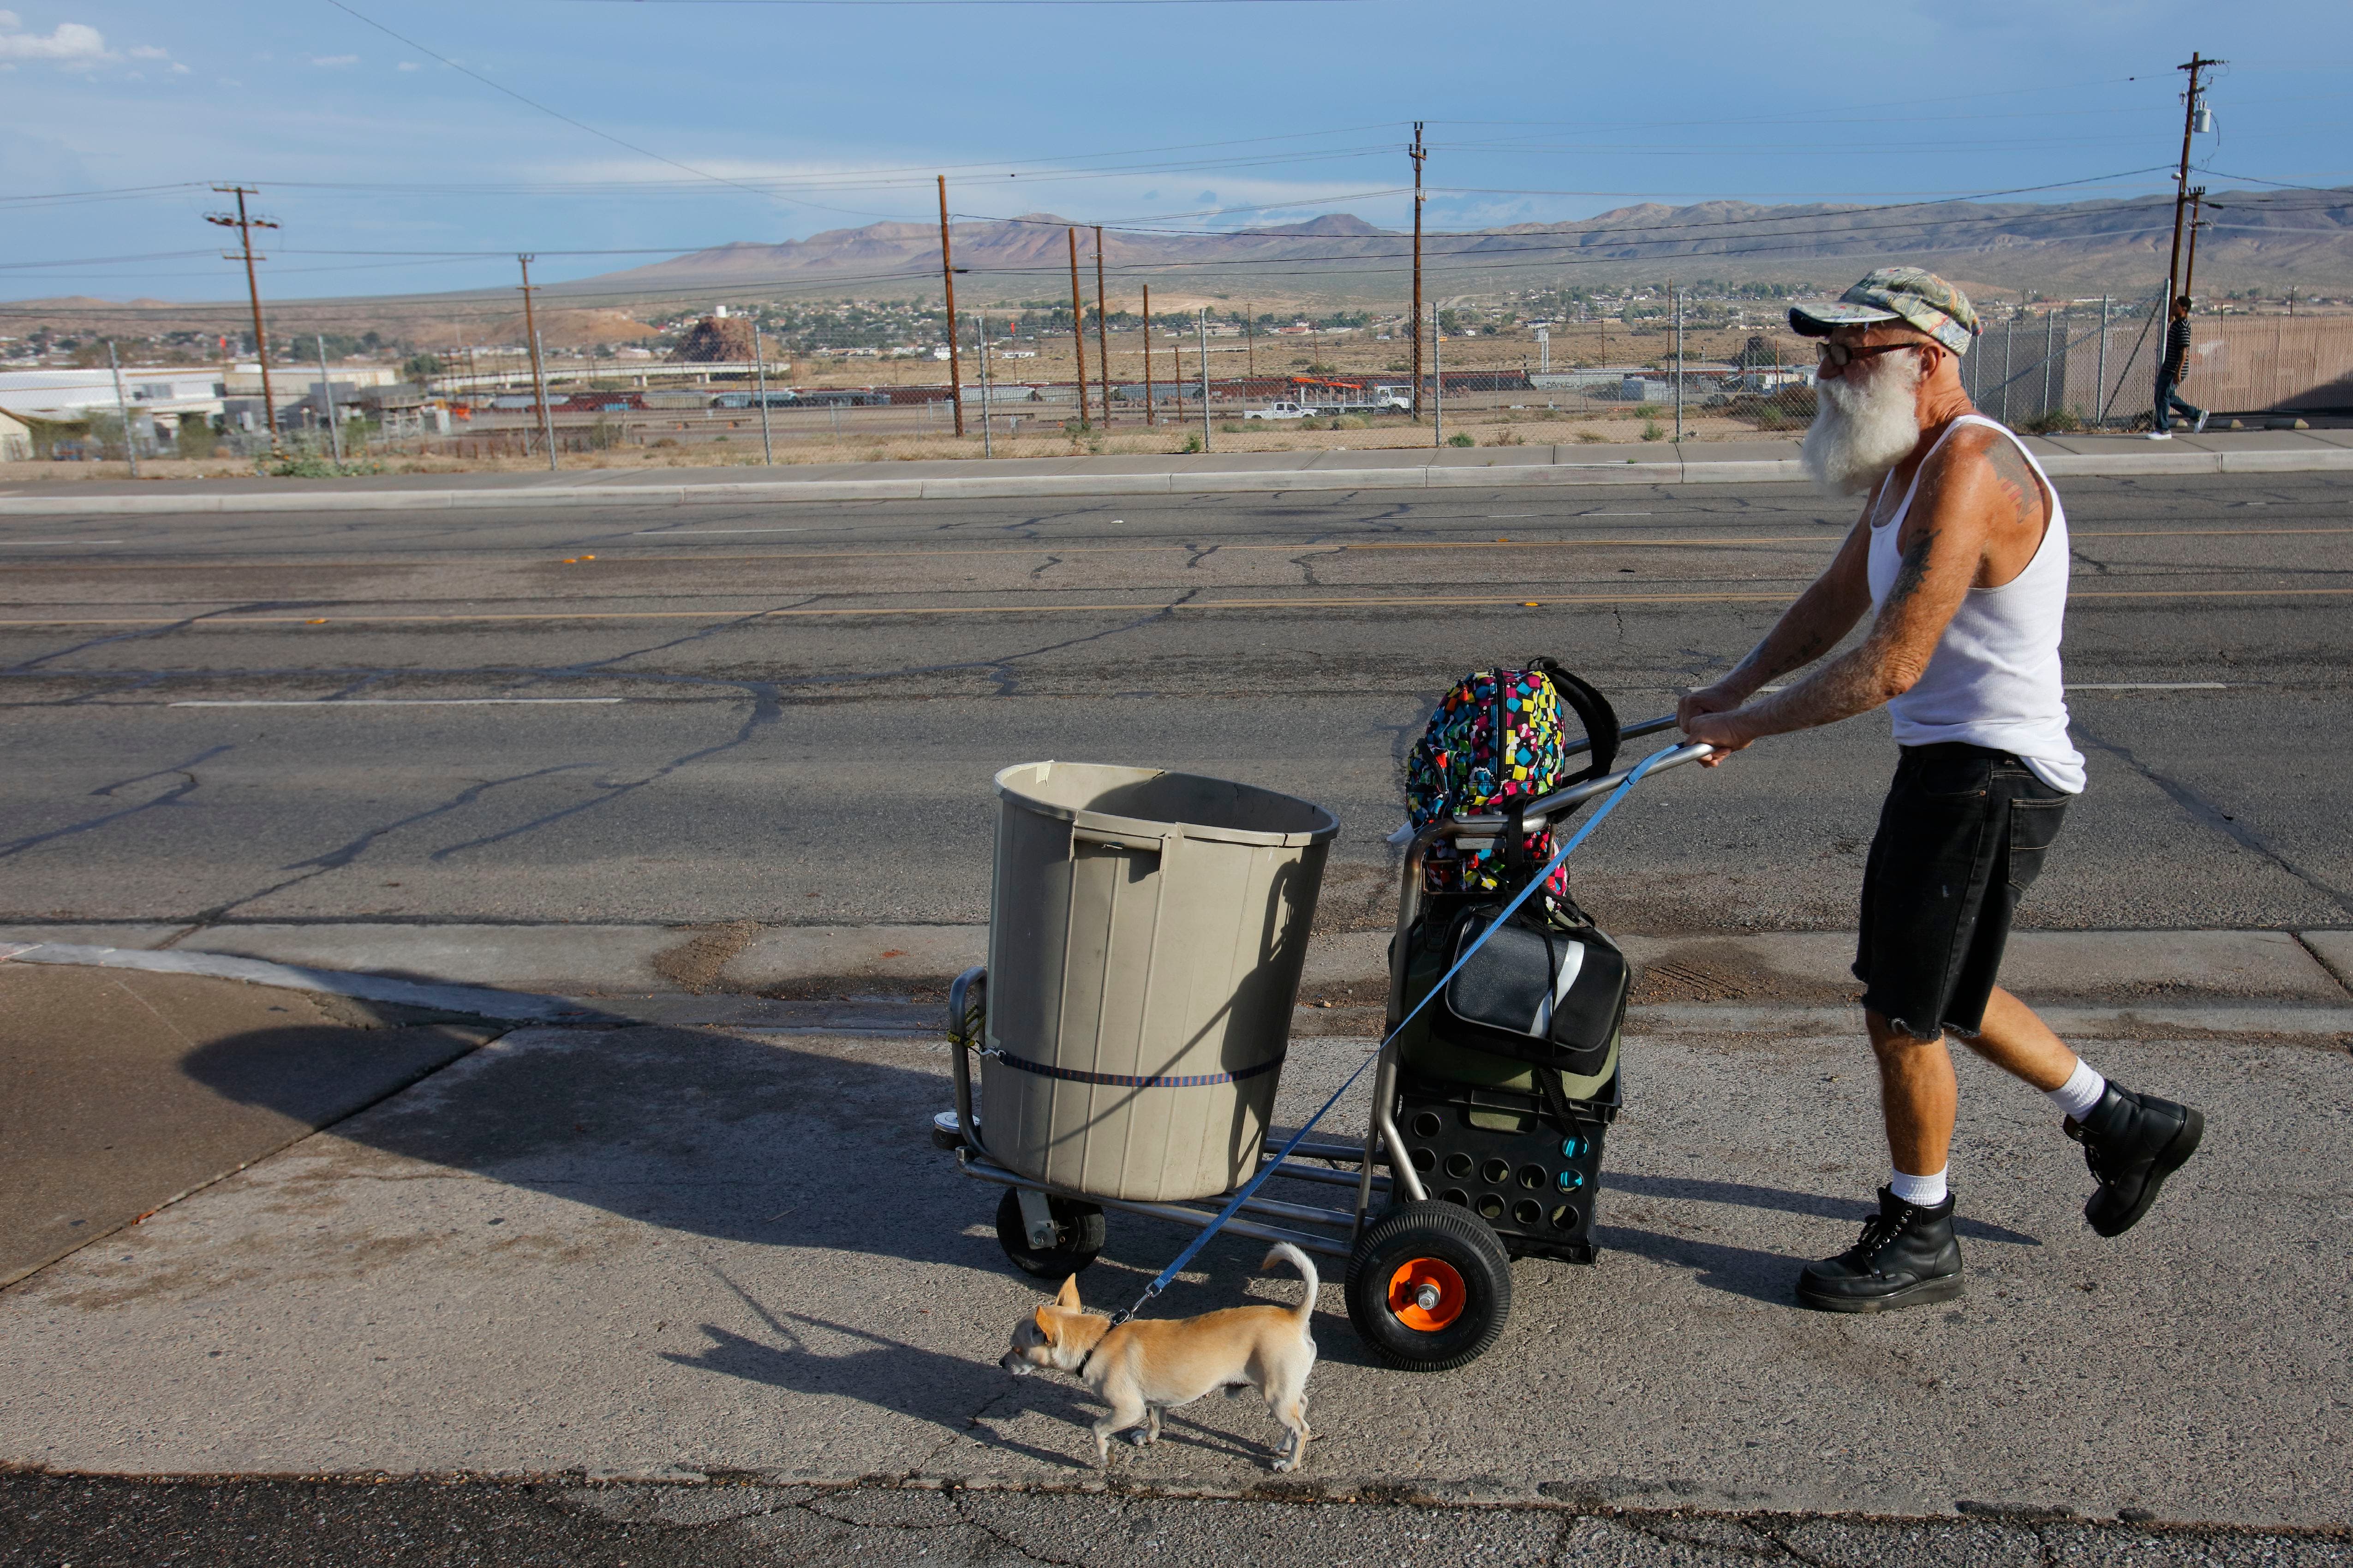 News :Homeless residents sue California city after being evicted from park and trashing their belongings: lawsuit